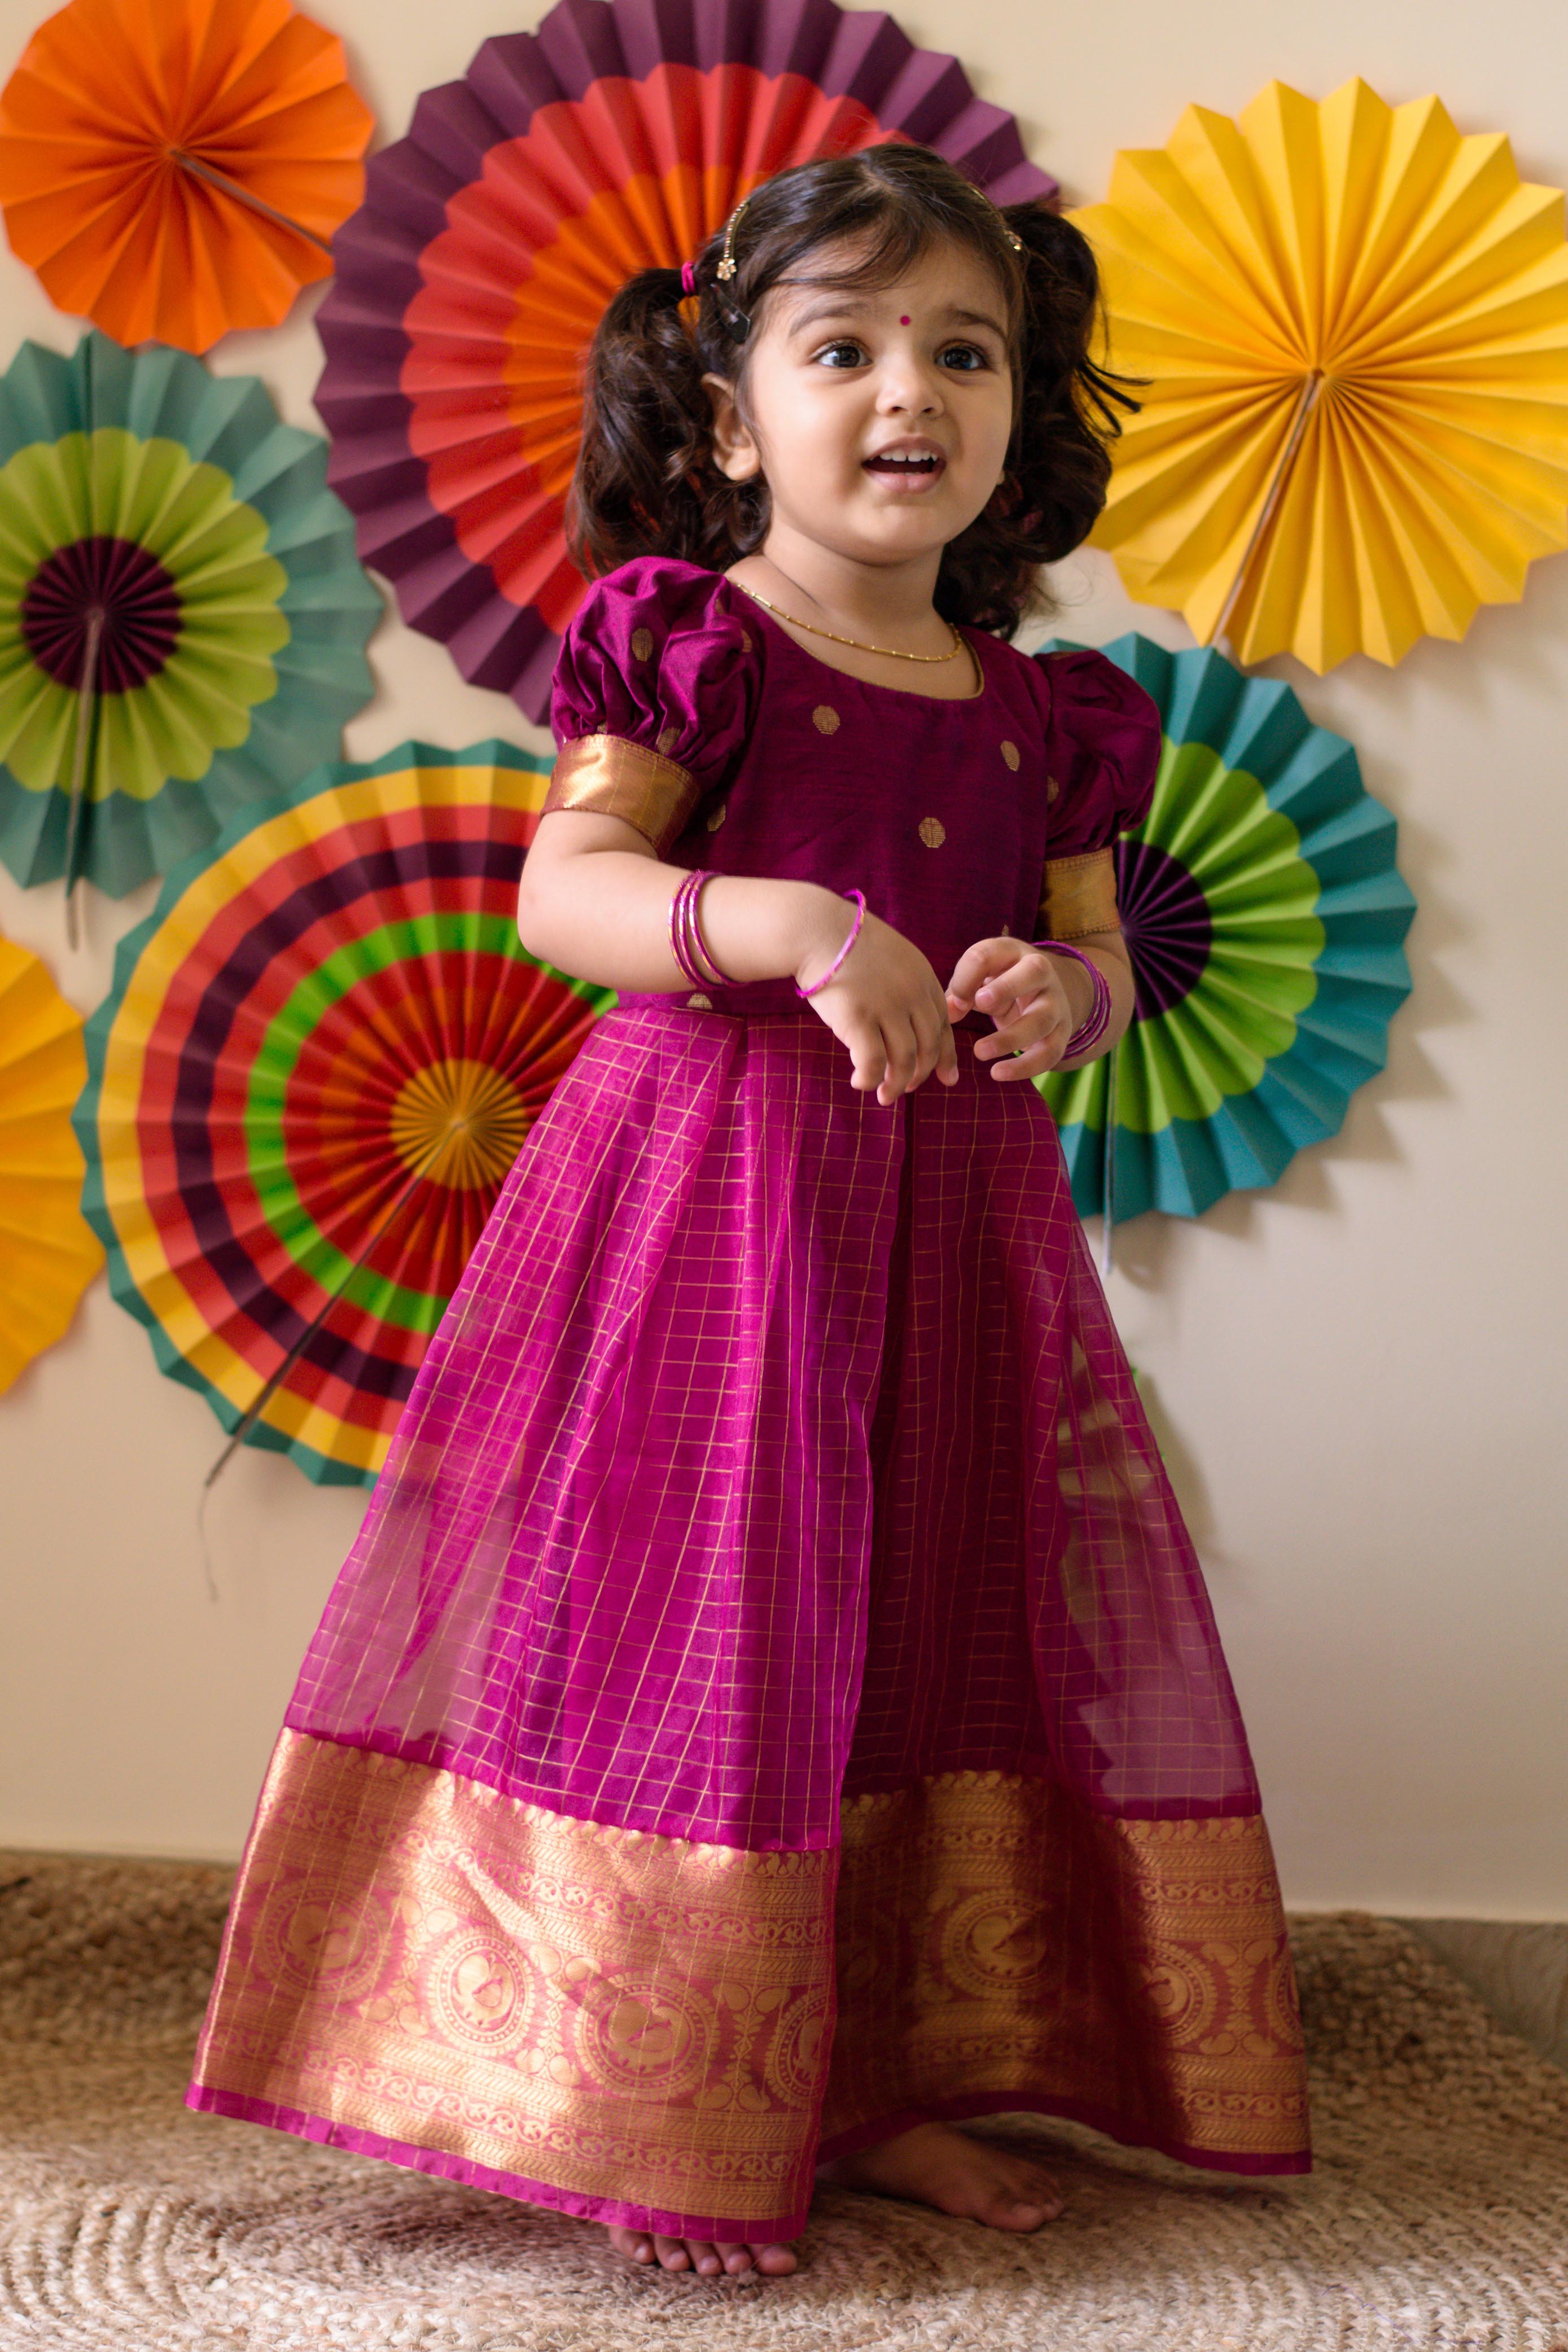 Find the perfect special occasion outfit for your little girl. Shop this cute Indian girl frocks made of chanderi and organza for her special day. Choose from an array of designer baby and children’s clothes online.